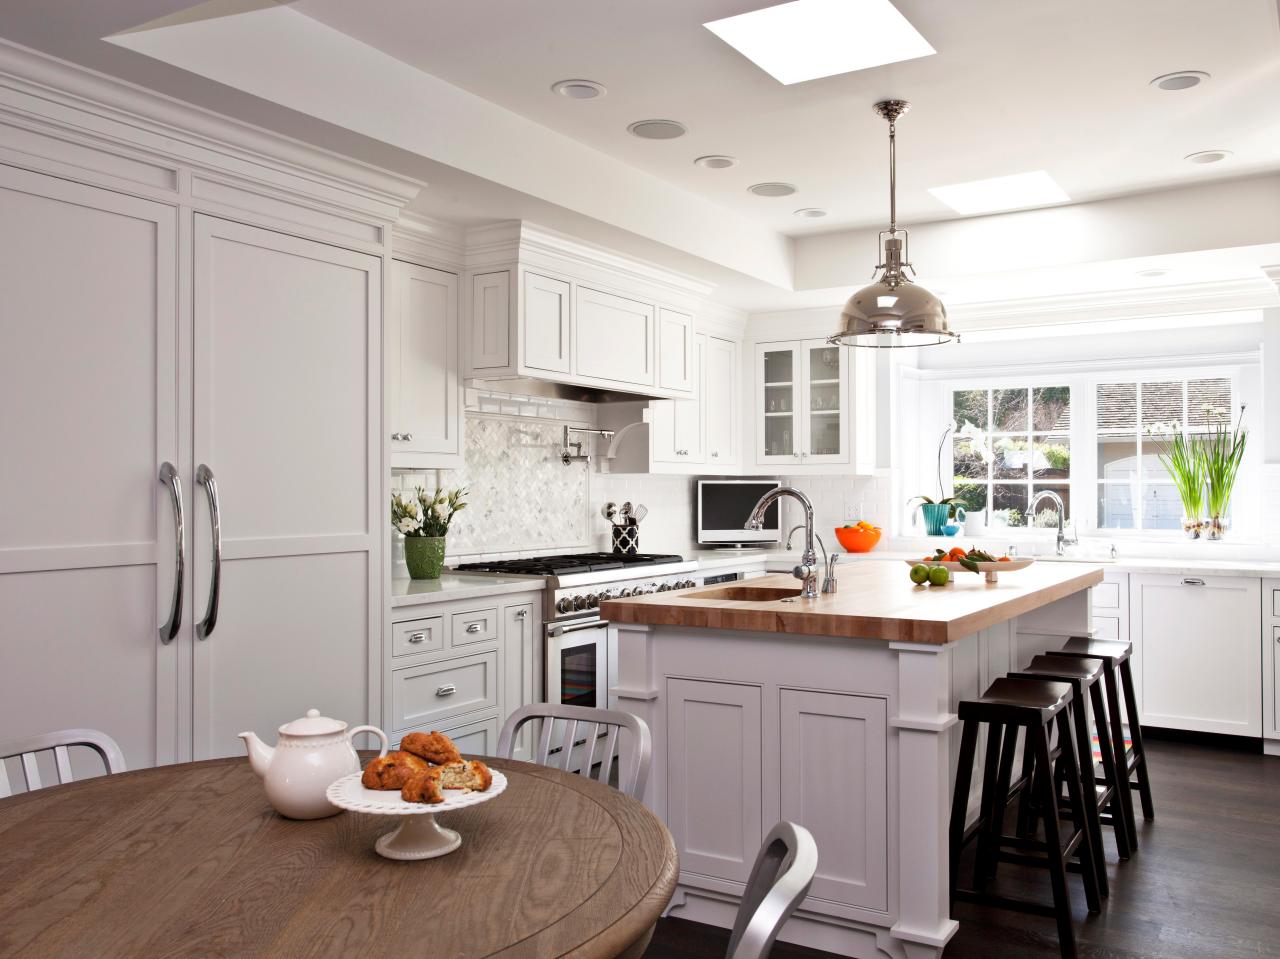 Resurfacing Kitchen Cabinets: Pictures & Ideas From HGTV ...